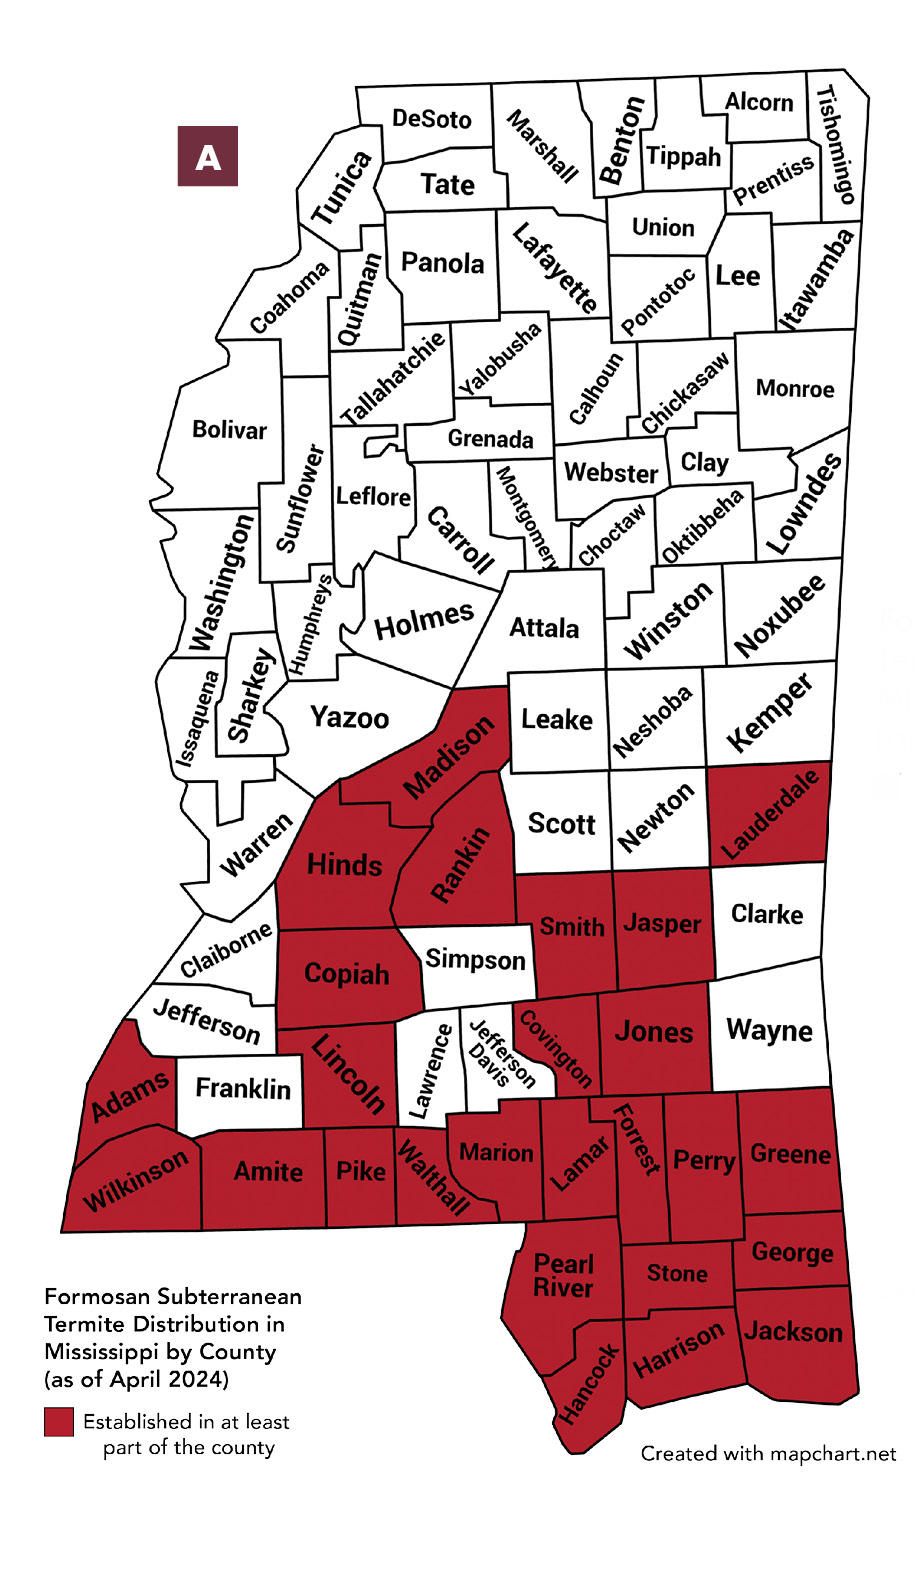 Formosan subterranean termite distribution by county as of April 2024. Established (in at least part of the county): Adams, Wilkinson, Amite, Madison, Hinds, Rankin, Copiah, Lincoln, Pike, Walthall, Marion, Smith, Jasper, Covington, Jones, Lauderdale, Lamar, Forrest, Perry, Greene, Pearl River, Stone, George, Hancock, Harrison, Jackson. 